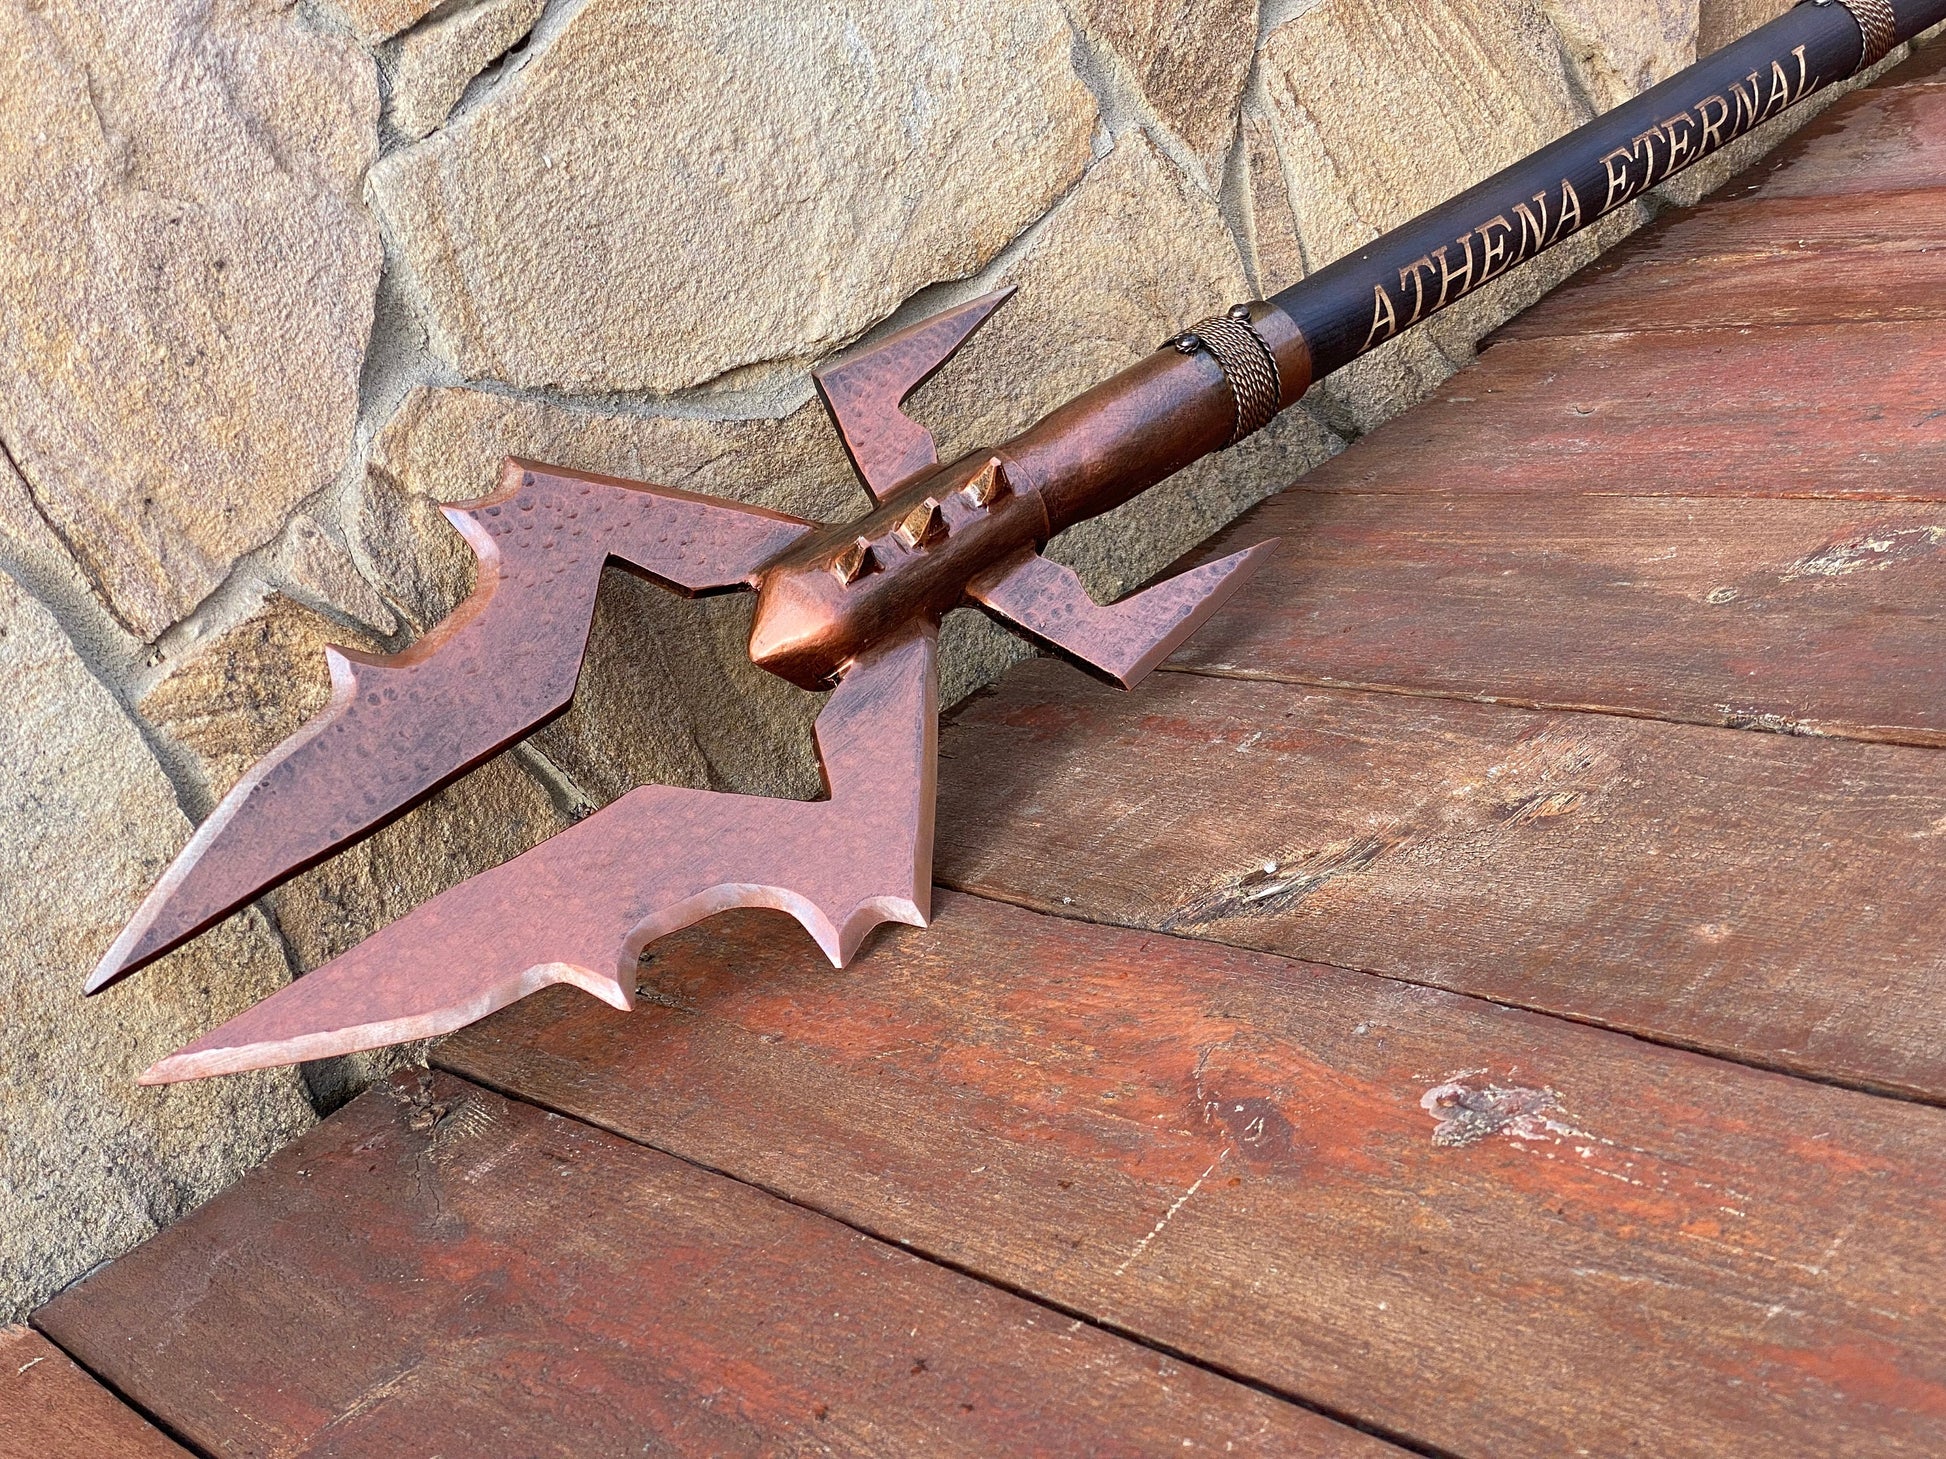 Blood spear, cosplay spear, spear, viking spear, medieval,birthday,gamer gift,Christmas,cosplay,steel gift,anniversary,personalized gift,axe